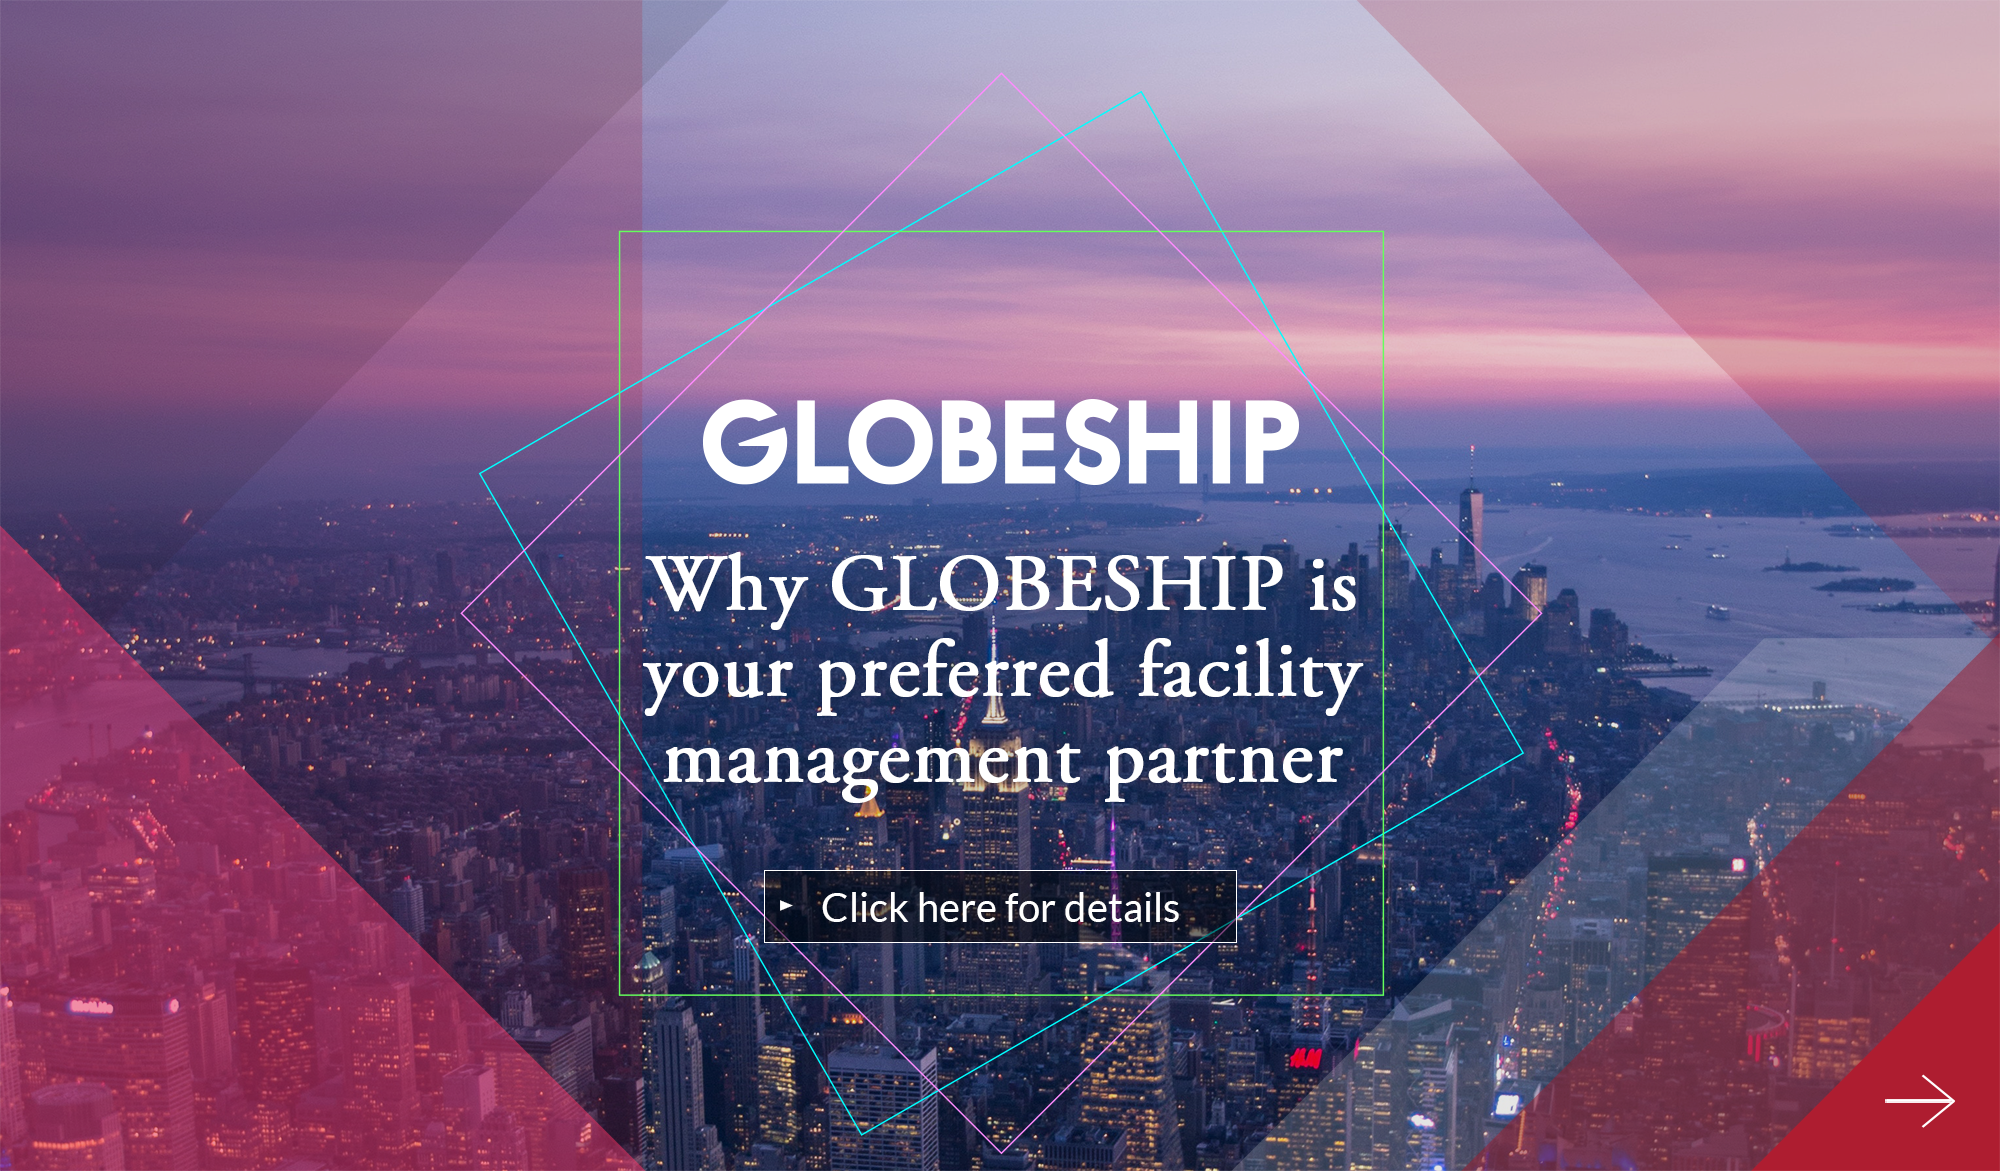 GLOBESHIP Why GLOBESHIP is your preferred facility management partner Click here for details